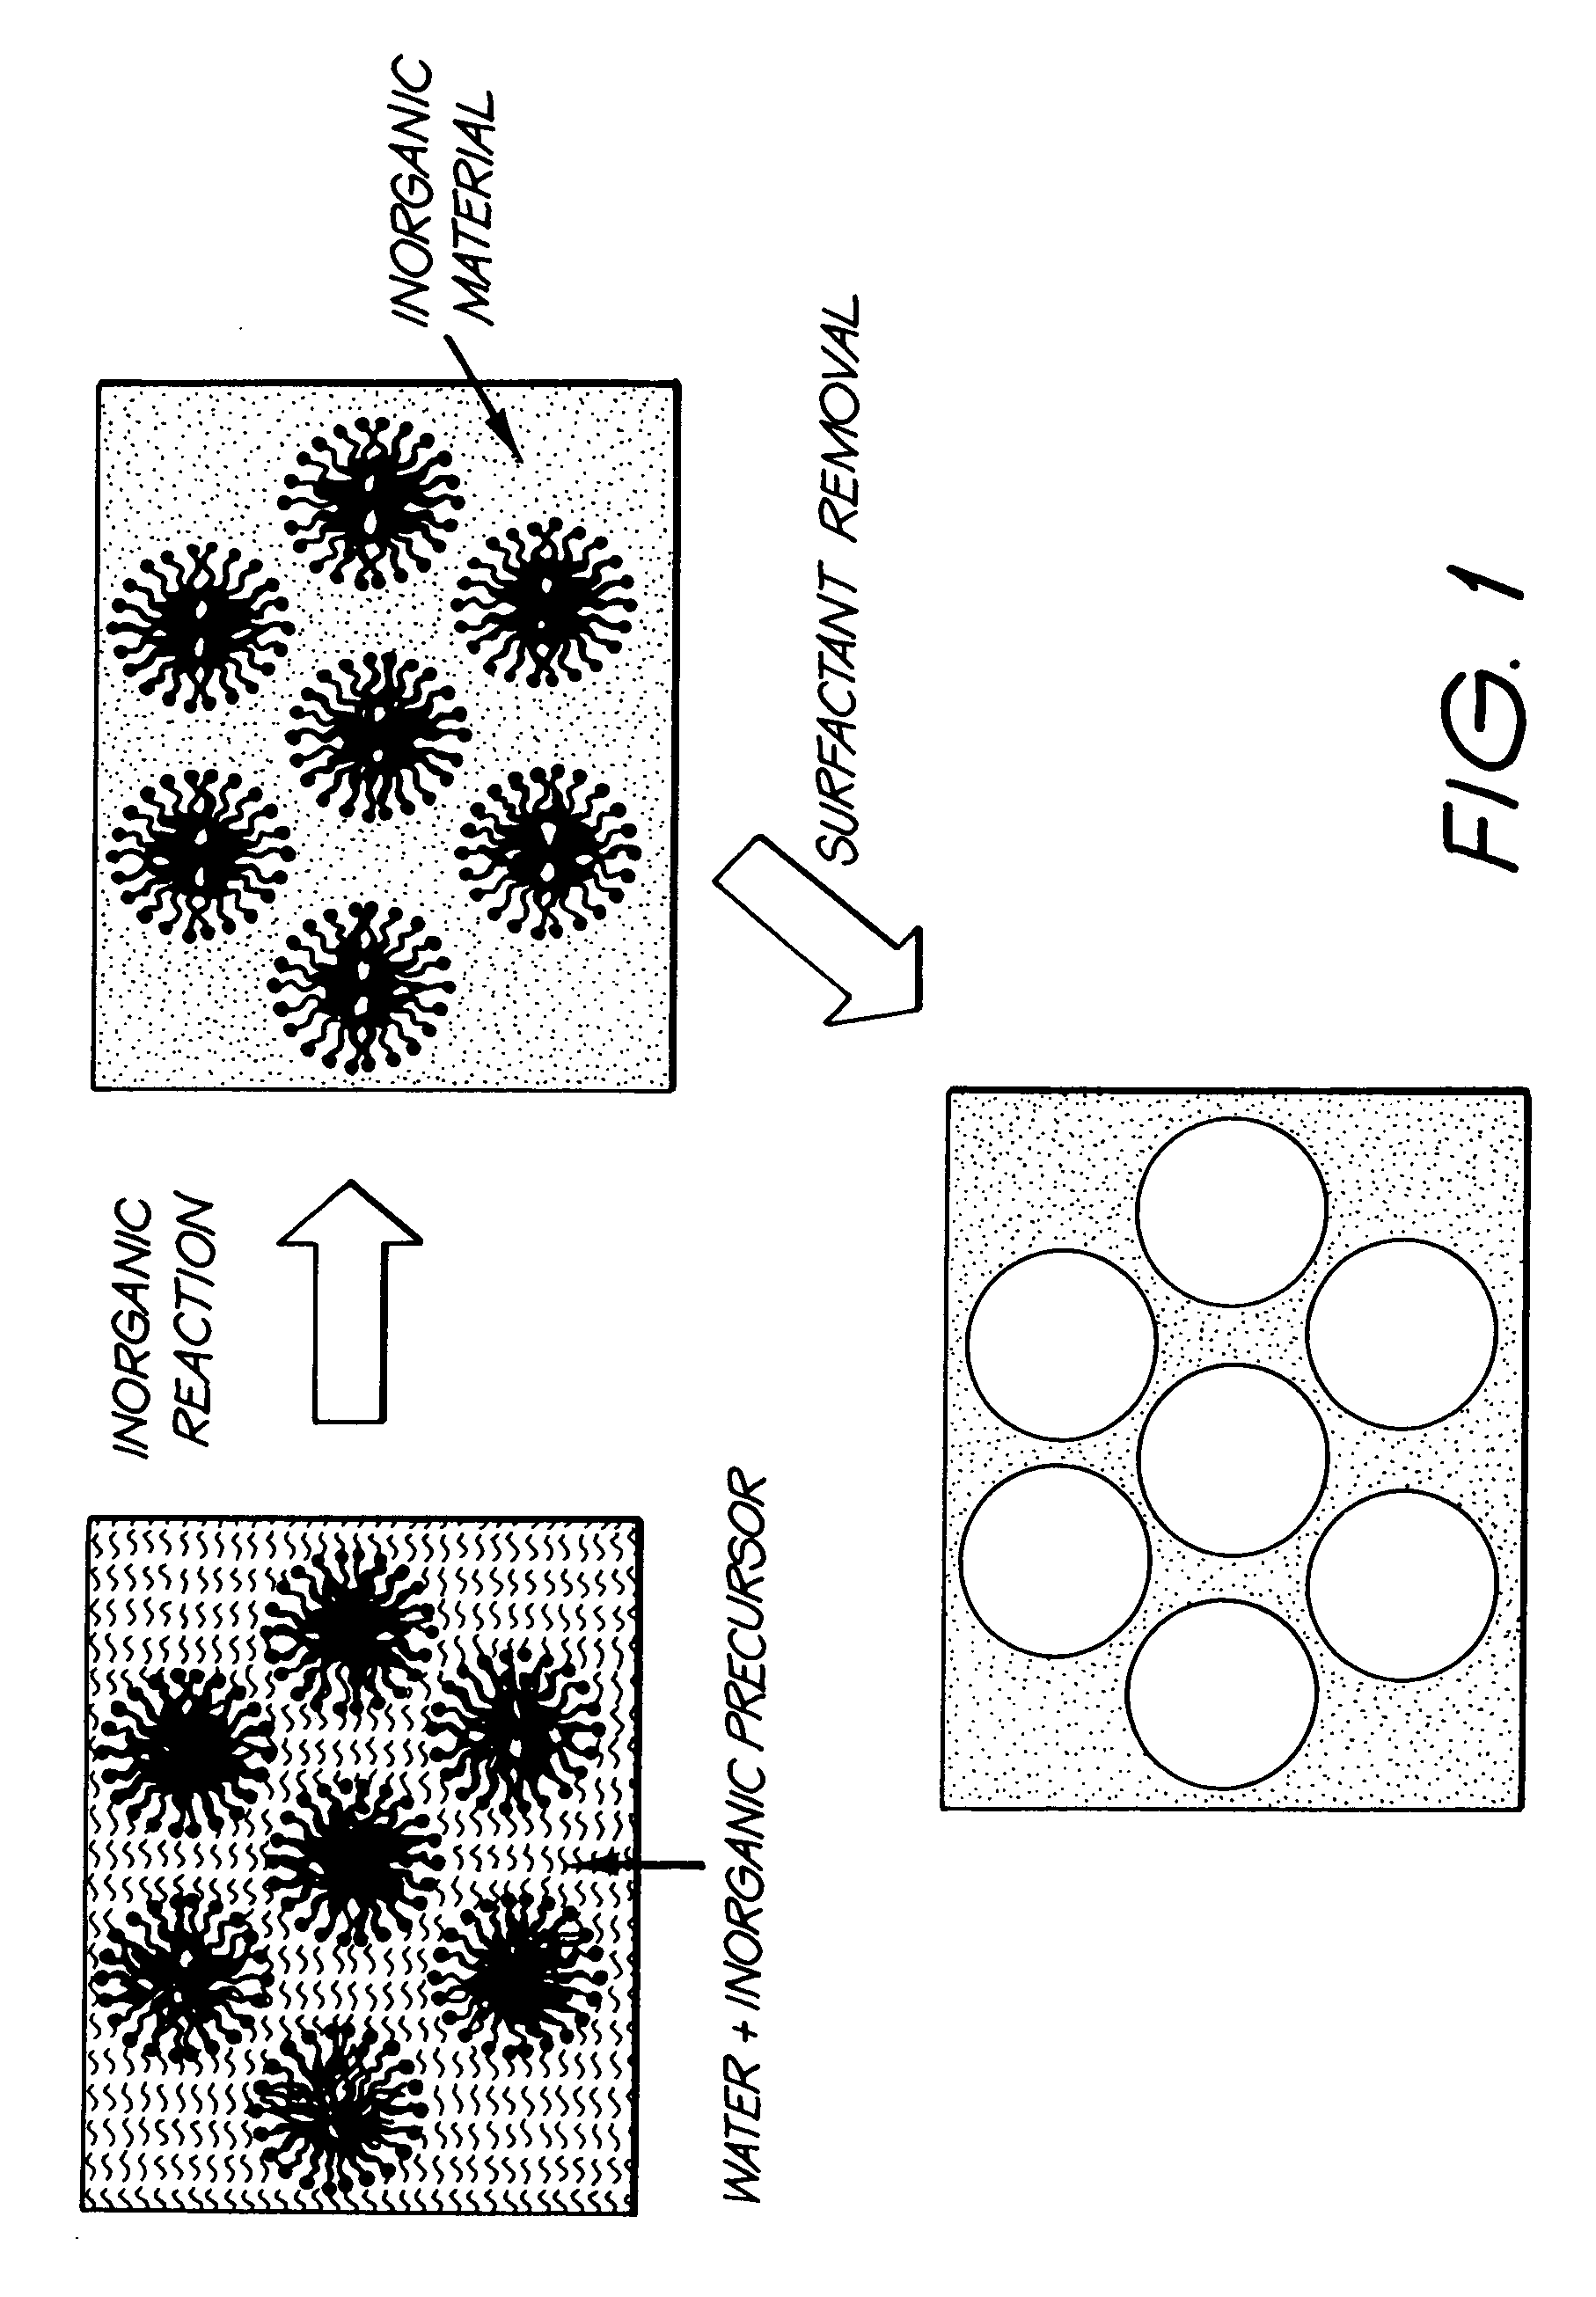 Production of fine-grained particles